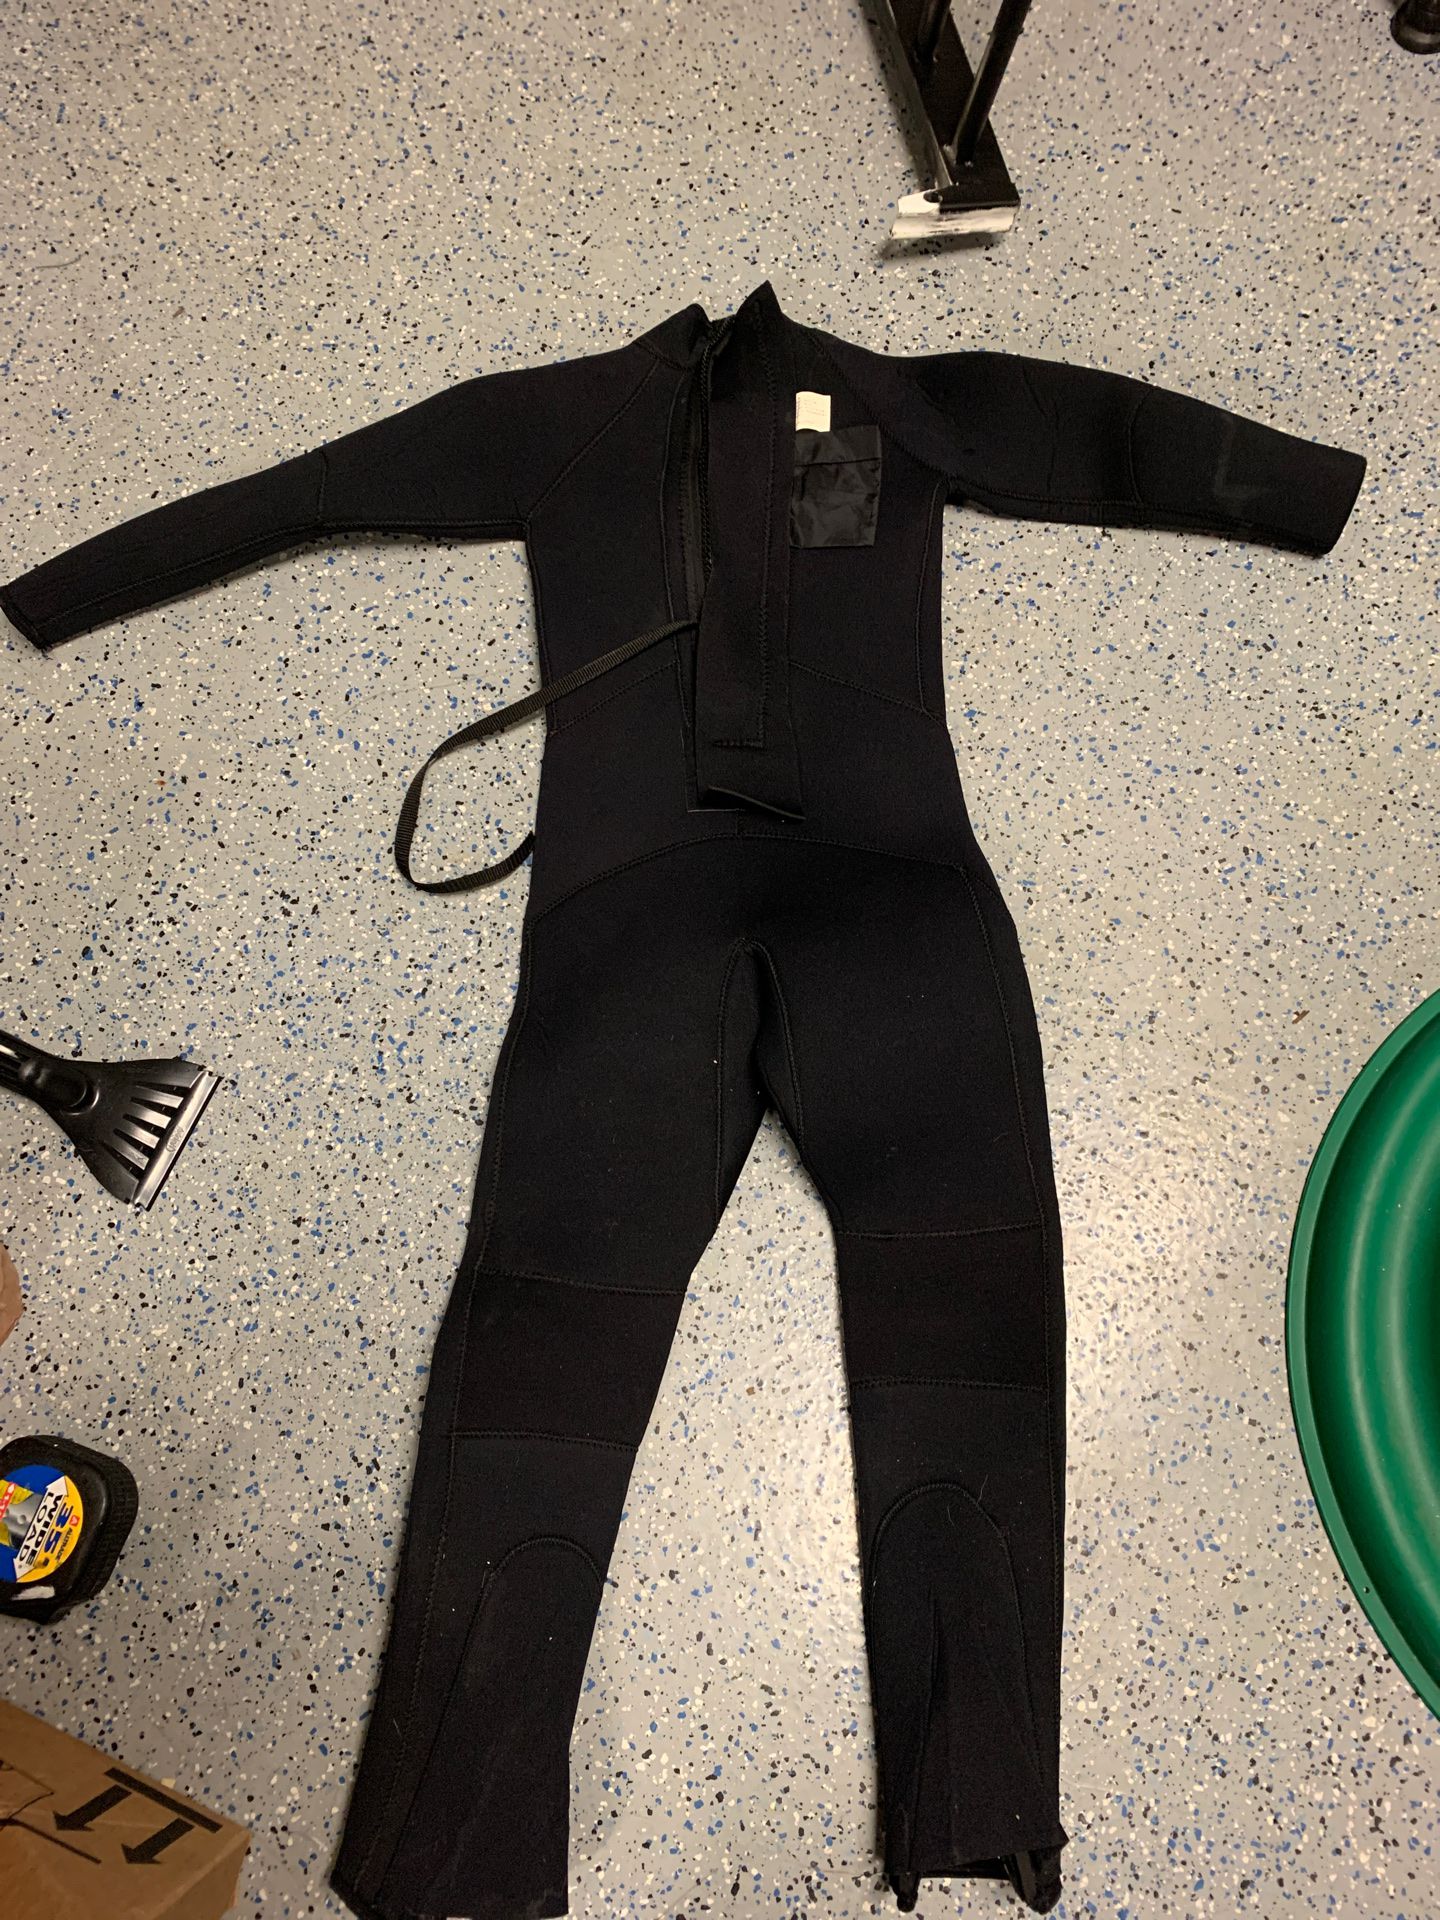 Small child’s wetsuit